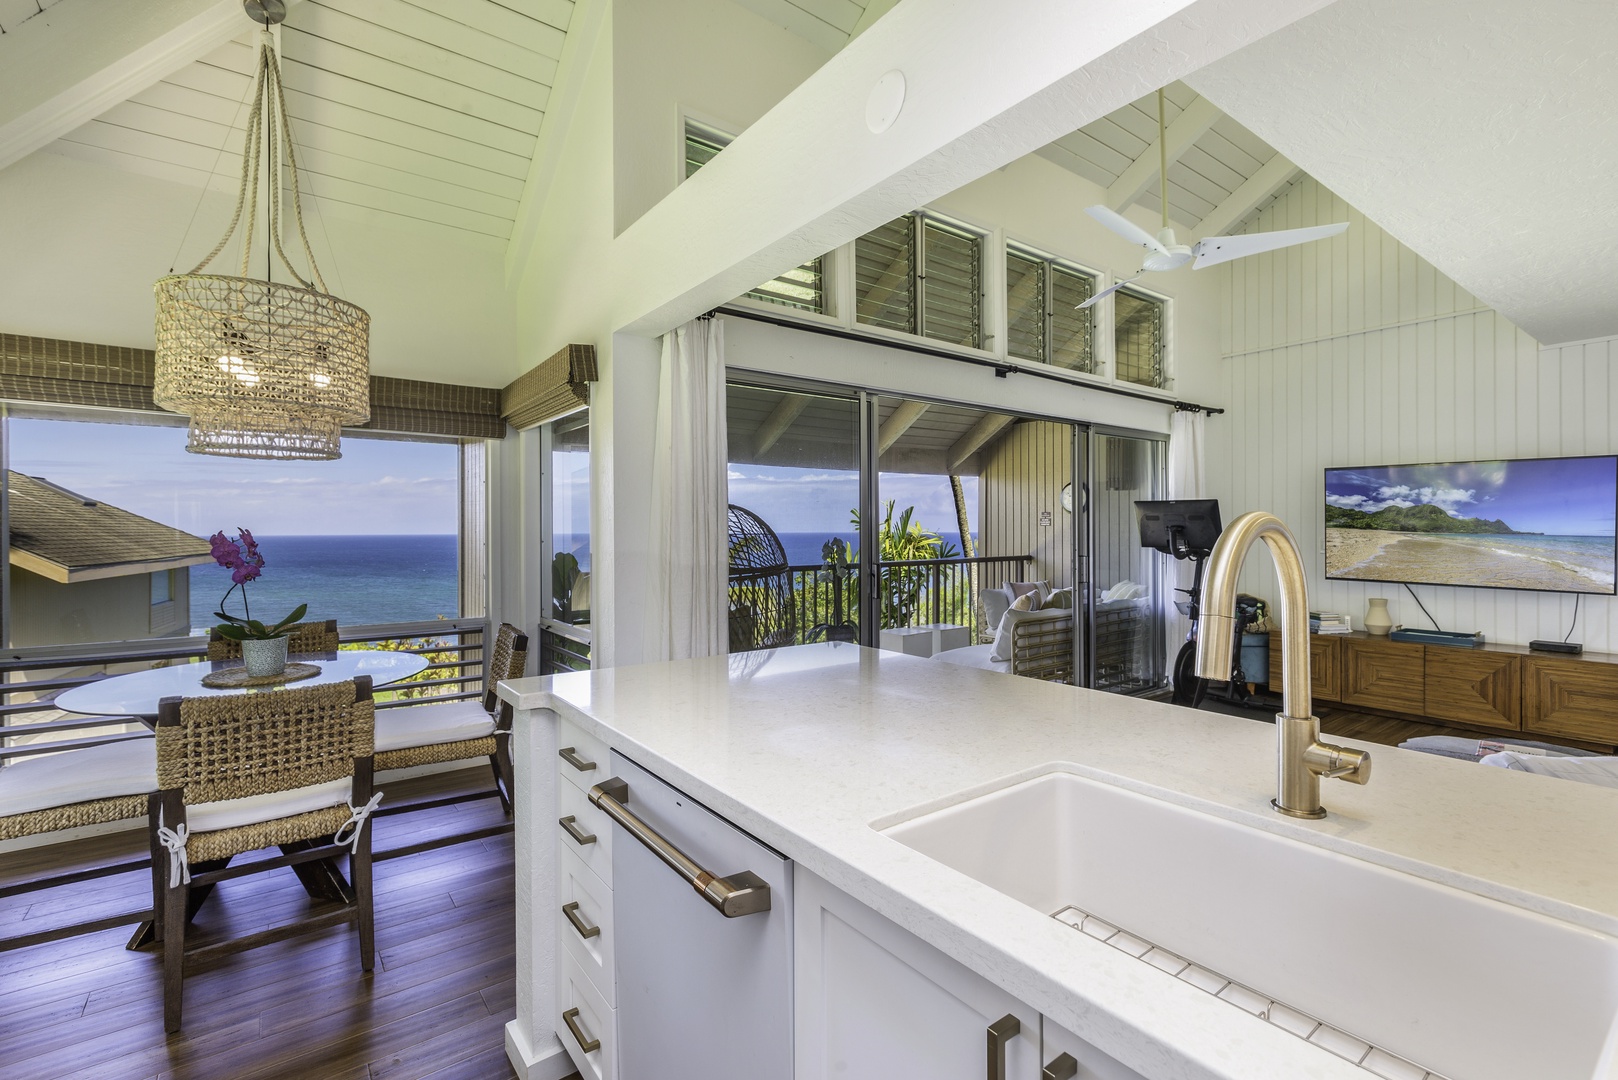 Princeville Vacation Rentals, Pali Ke Kua 207 - Get ready for breakfast! Our newly renovated galley-style kitchen is fully equipped with custom cabinets and all the appliances you need, including a dishwasher. Plus, there's a breakfast bar - so you can get your day started in no time!